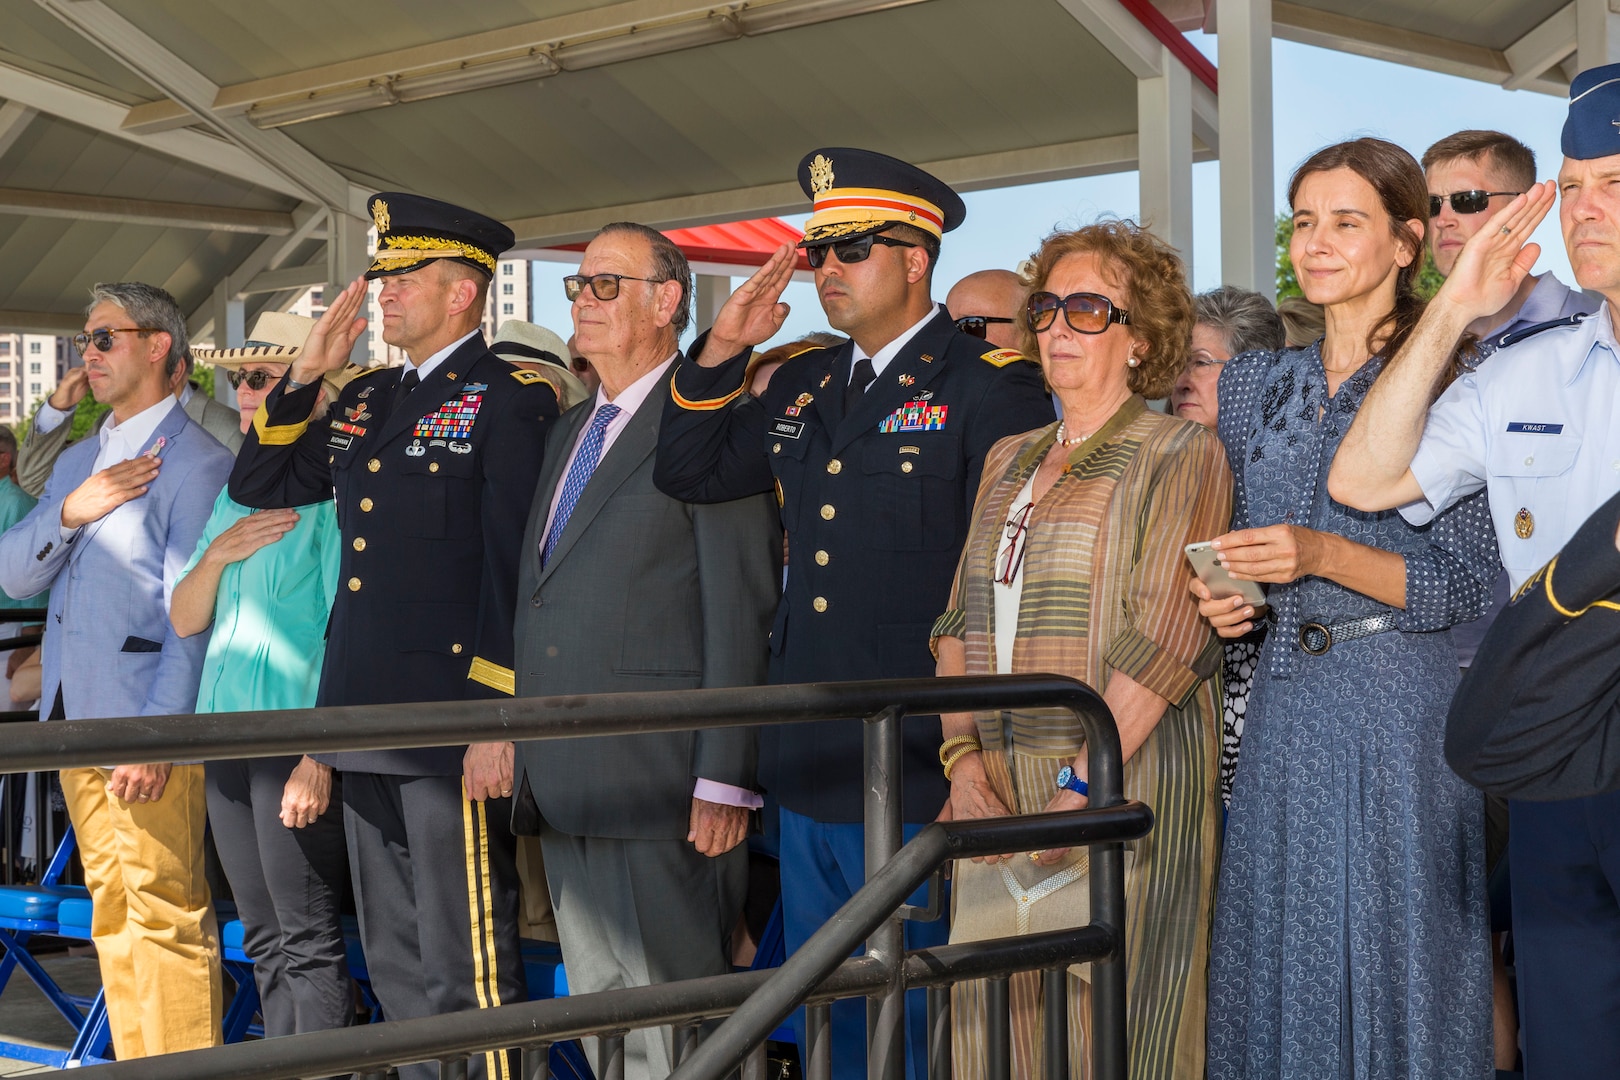 Joint Base San Antonio and community members render honors as the national anthem plays during the annual Military Appreciation Weekend May 6, 2017 at Joint Base San Antonio-Fort Sam Houston, Texas. U.S. Army North and JBSA hosted the two-day event, which featured music, family activities, and various military demonstrations. This year, the appreciation weekend also commemorated the 300th anniversary for the city of San Antonio. (U.S. Air Force photo by Ismael Ortega / Released)